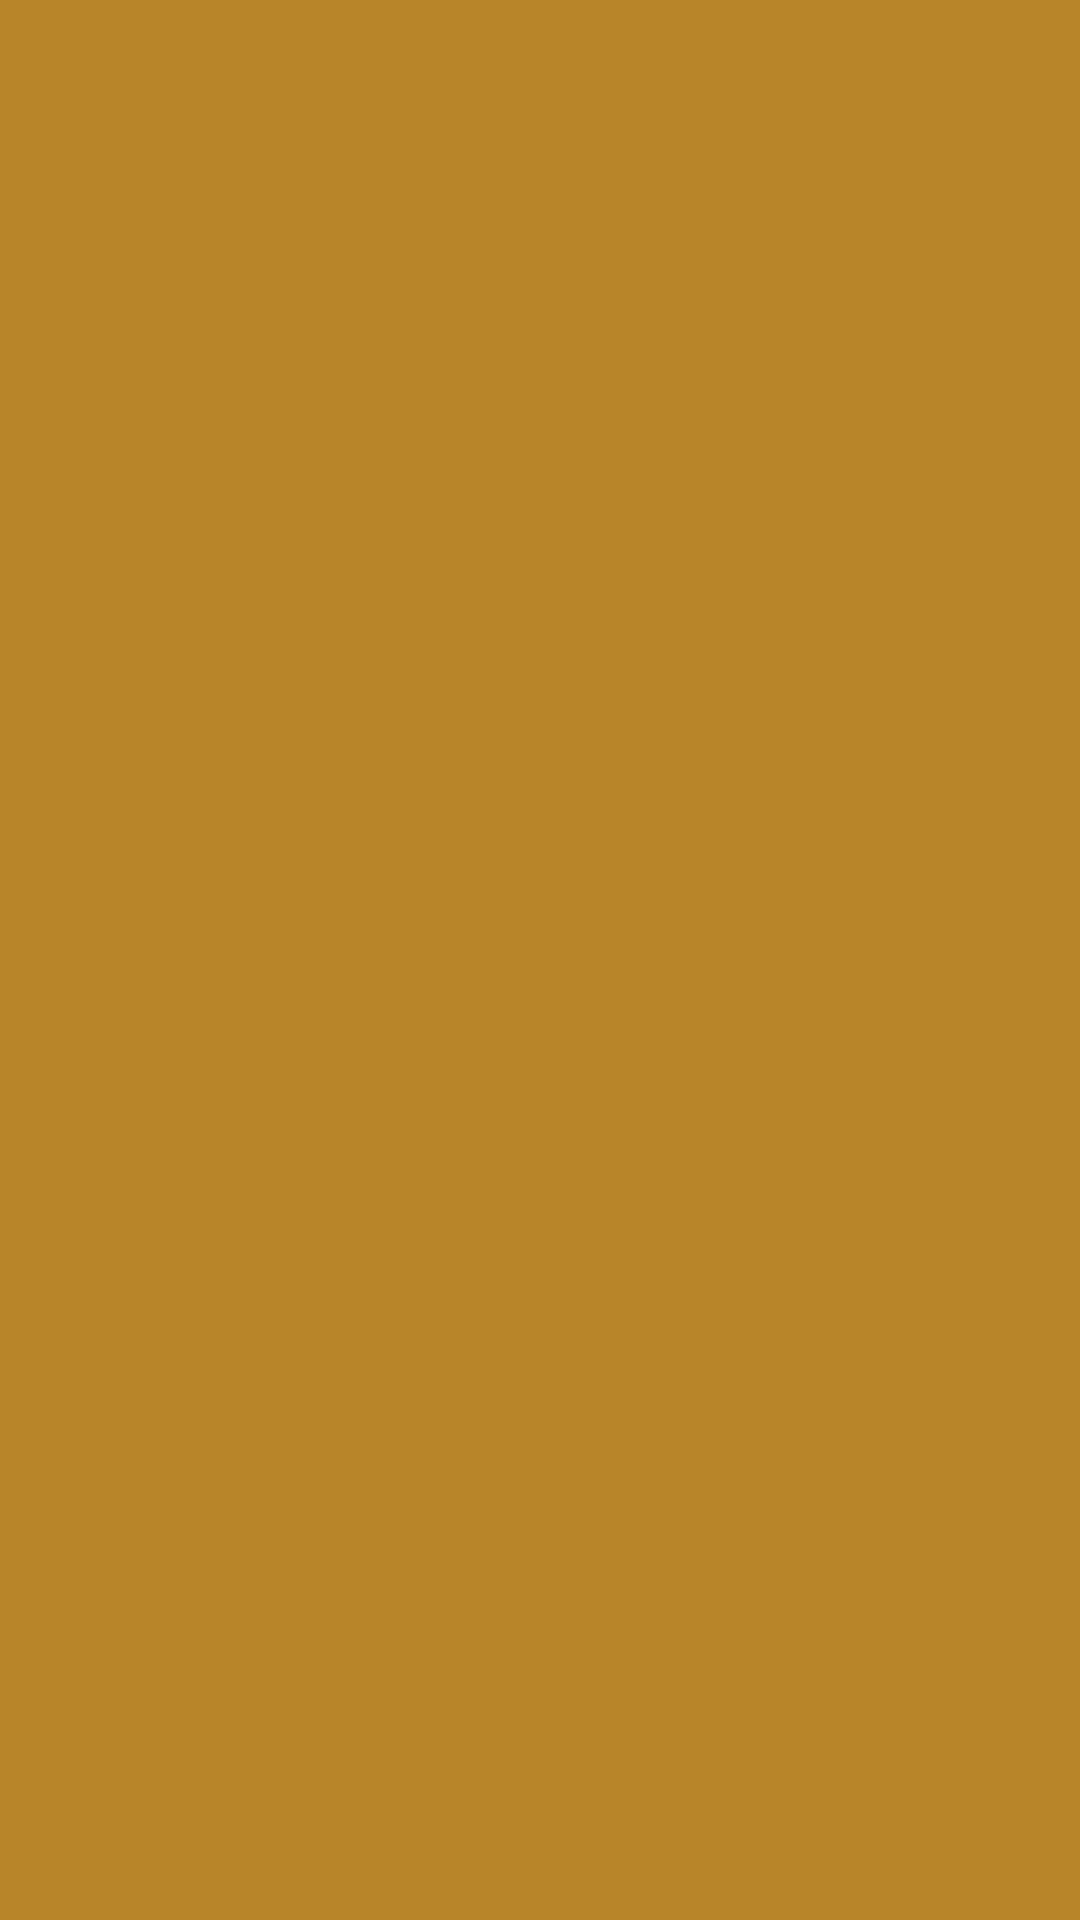 1080x1920 University Of California Gold Solid Color Background